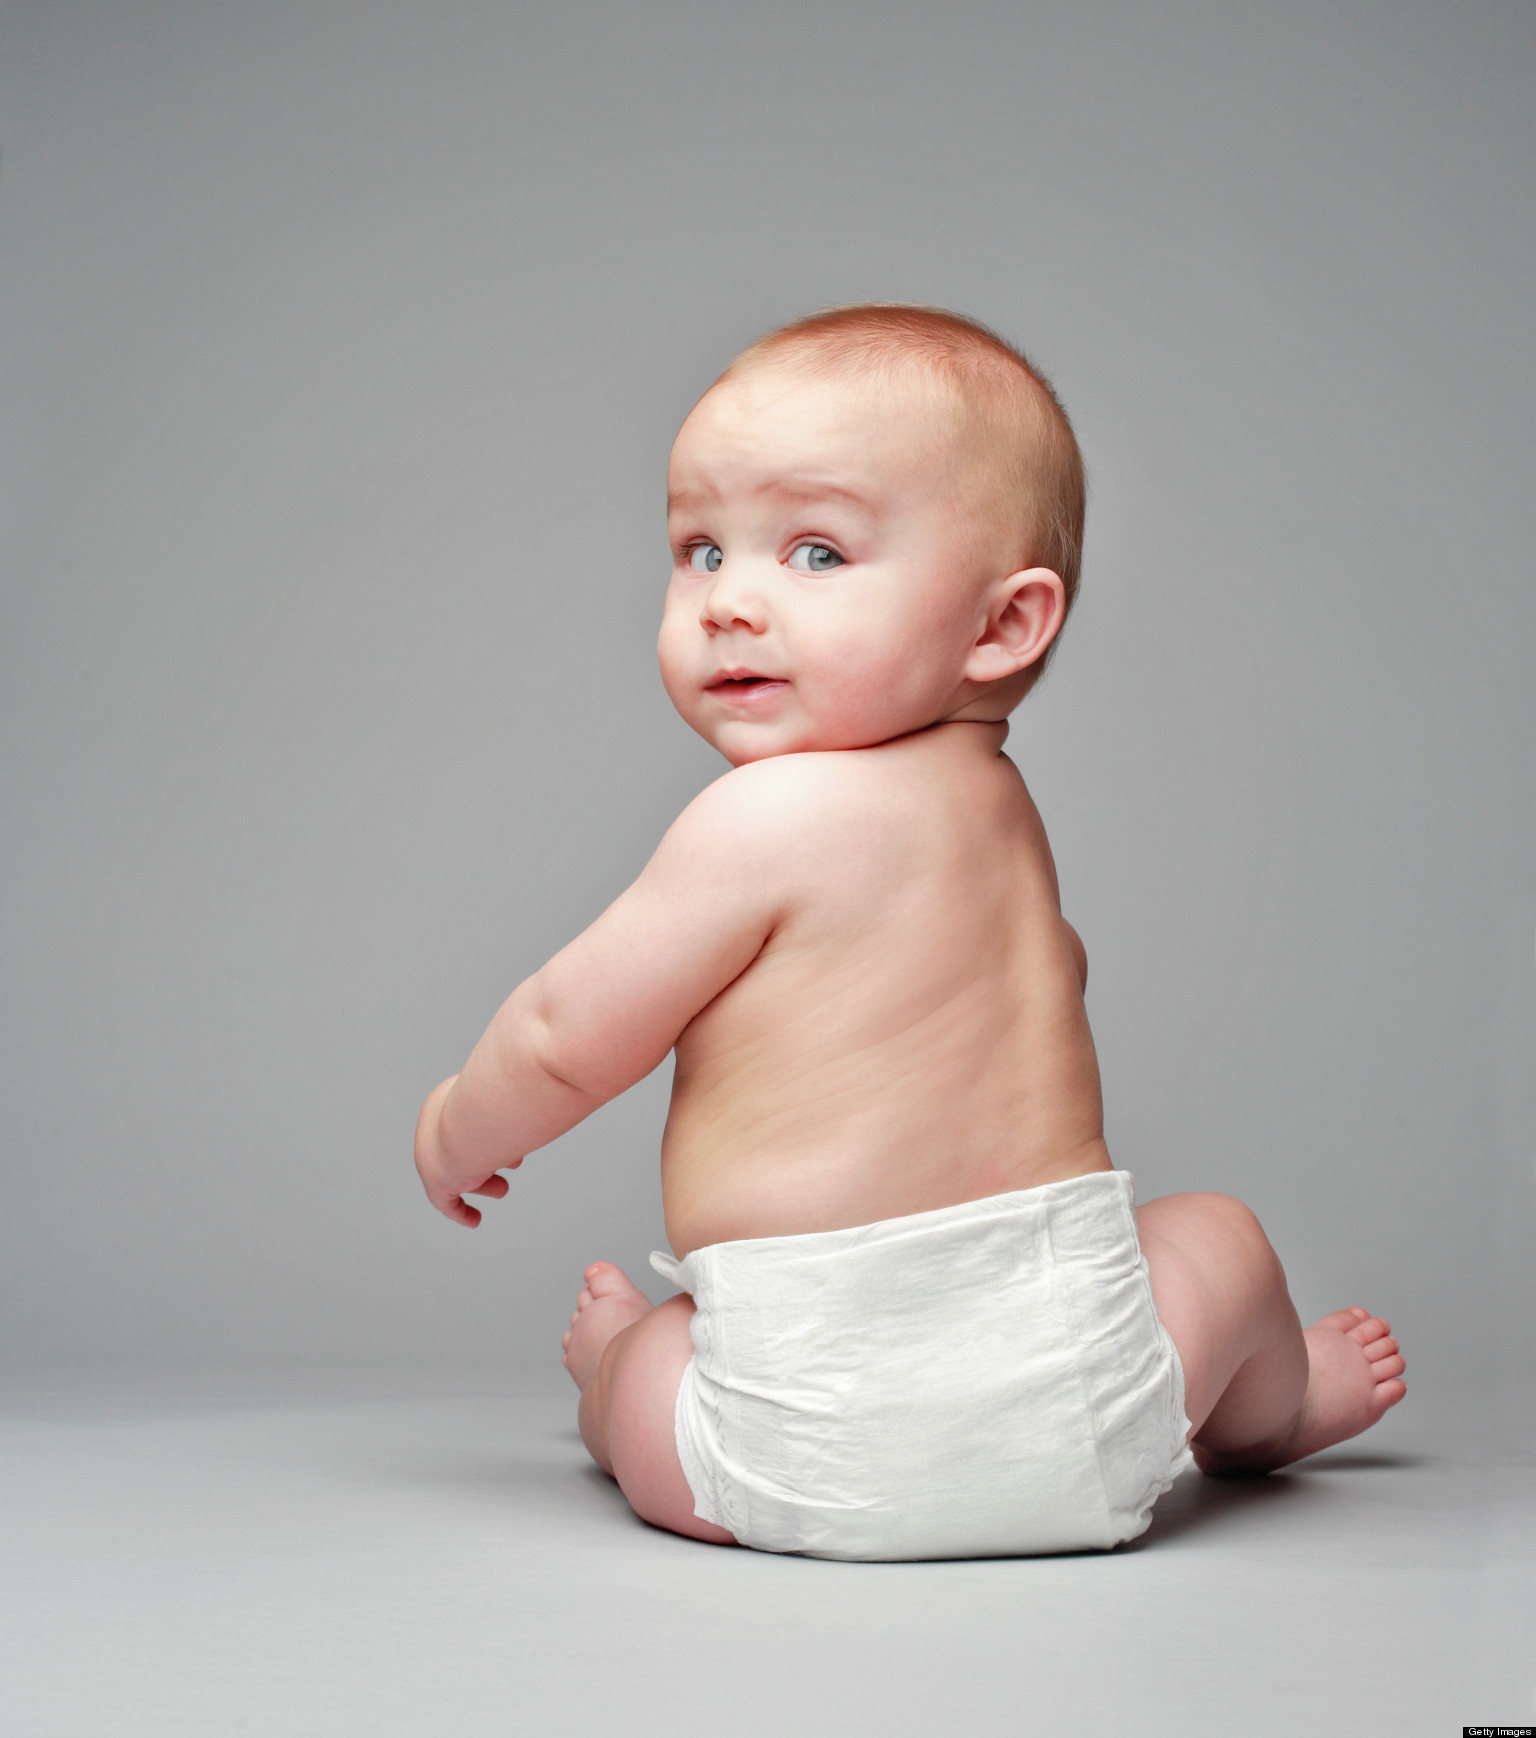 The Best Kind of Diapers | HuffPost